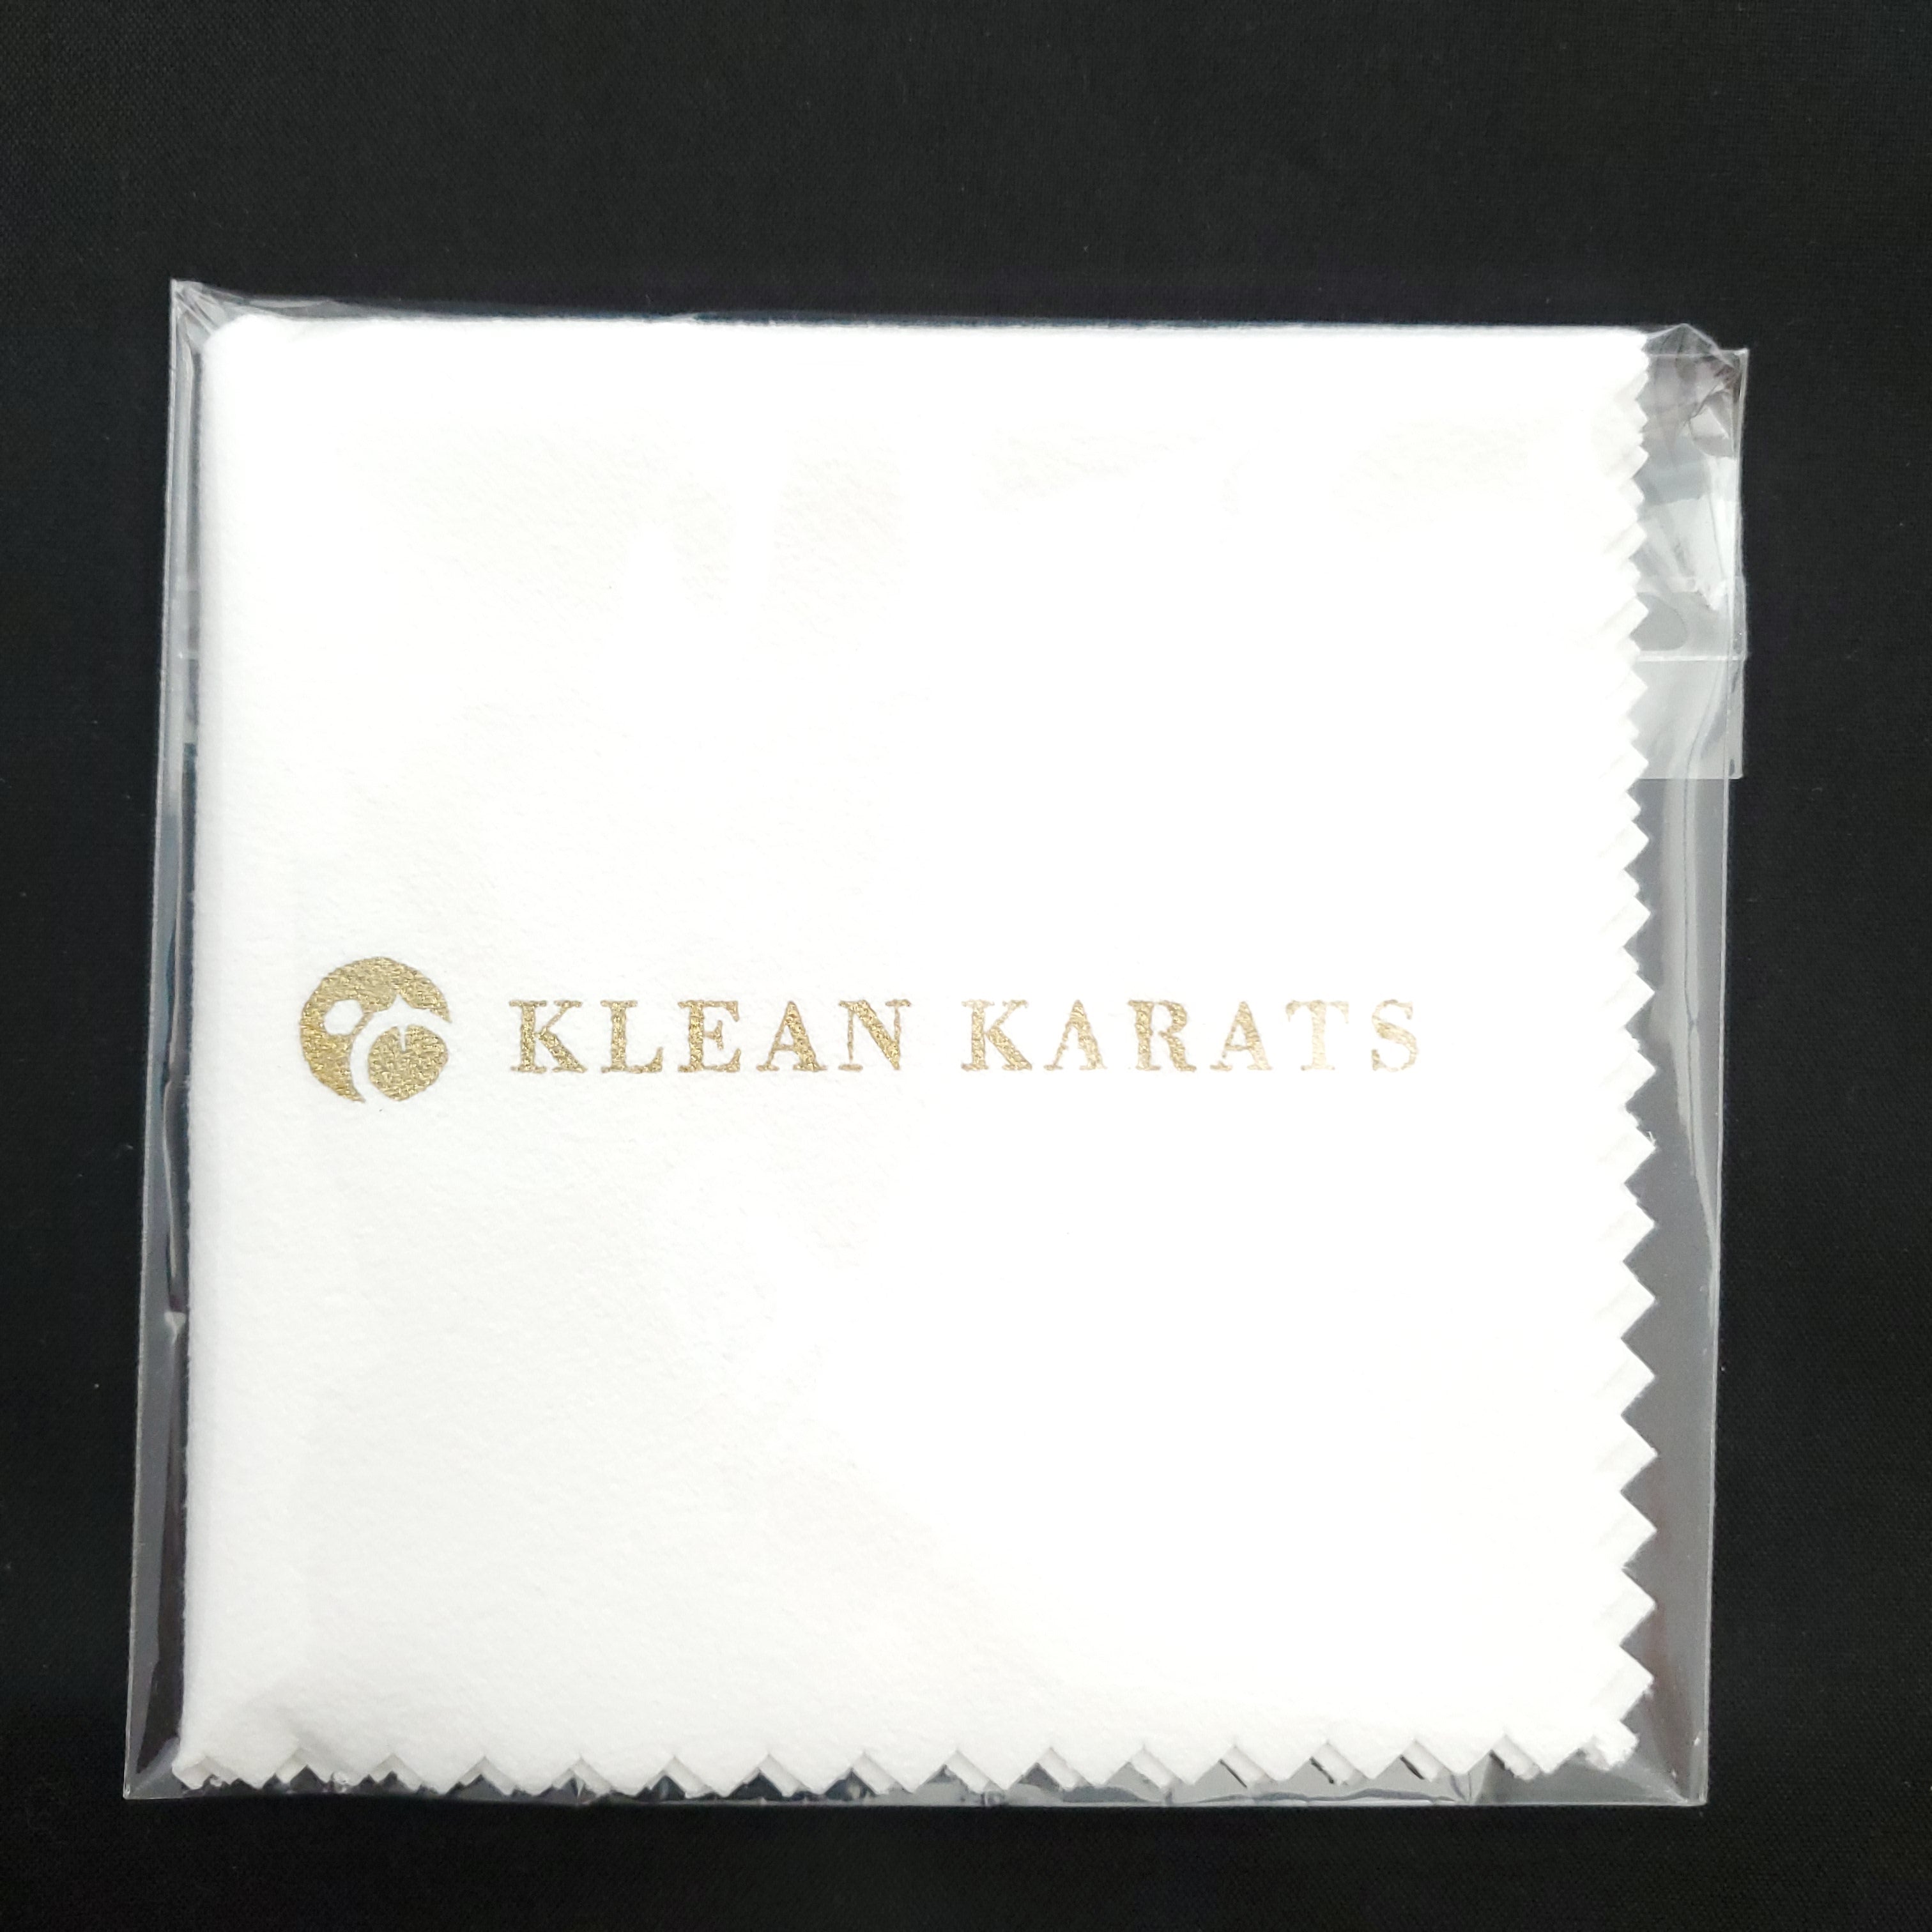 White jewelry polishing cloth folded and wrapped in clear plastic packaging